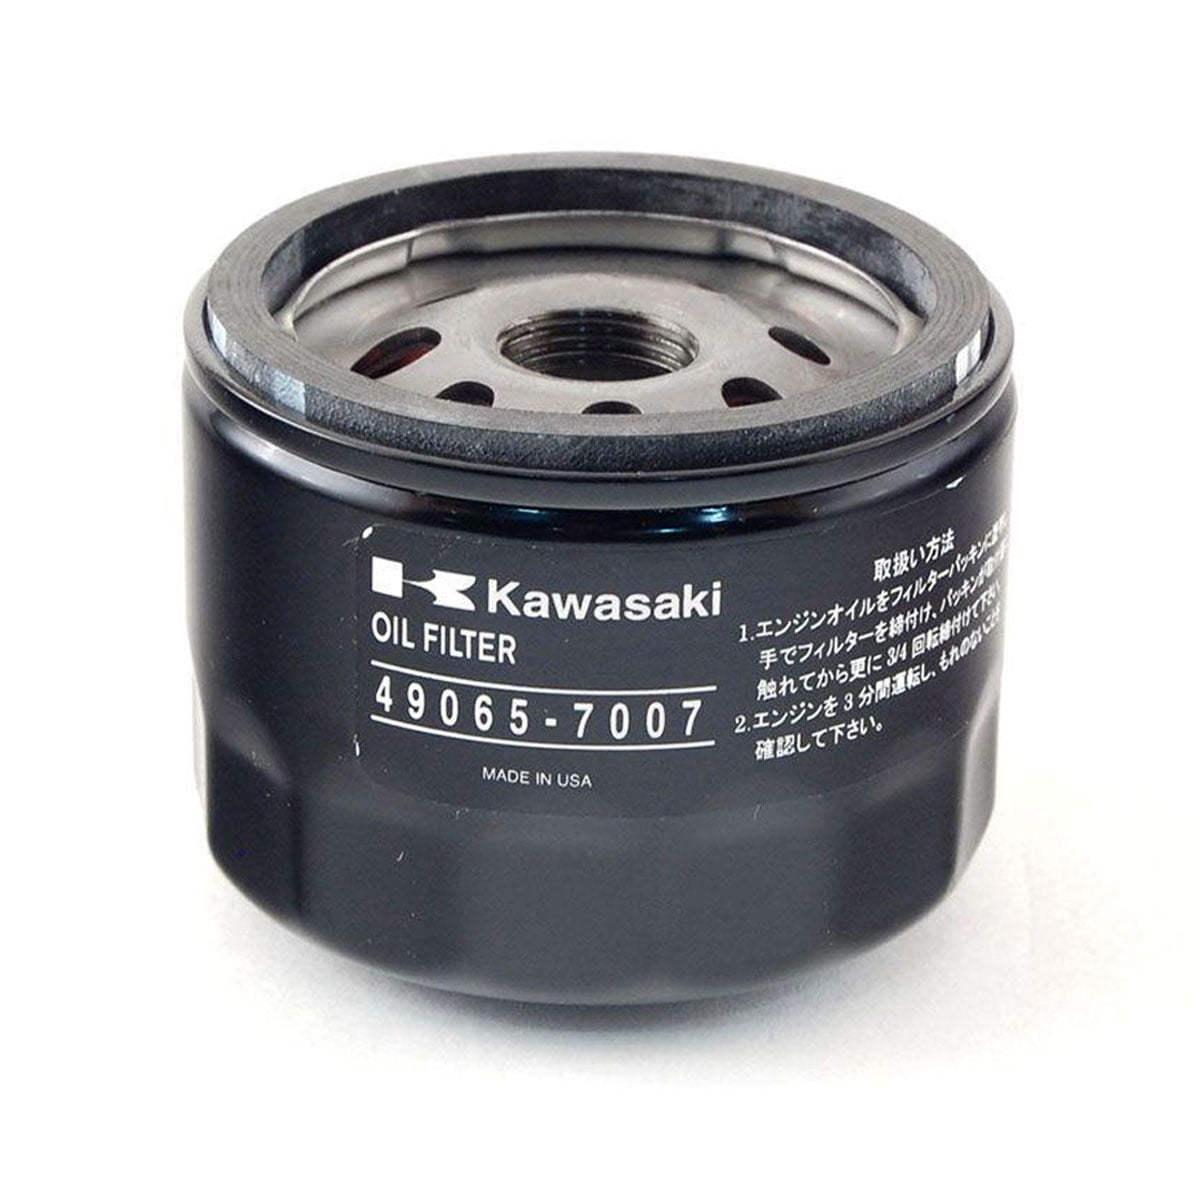 Laser 93100 Oil Filter Replaces Briggs 692513 70185 KAW 49065-7007 49065-7010 for sale online 